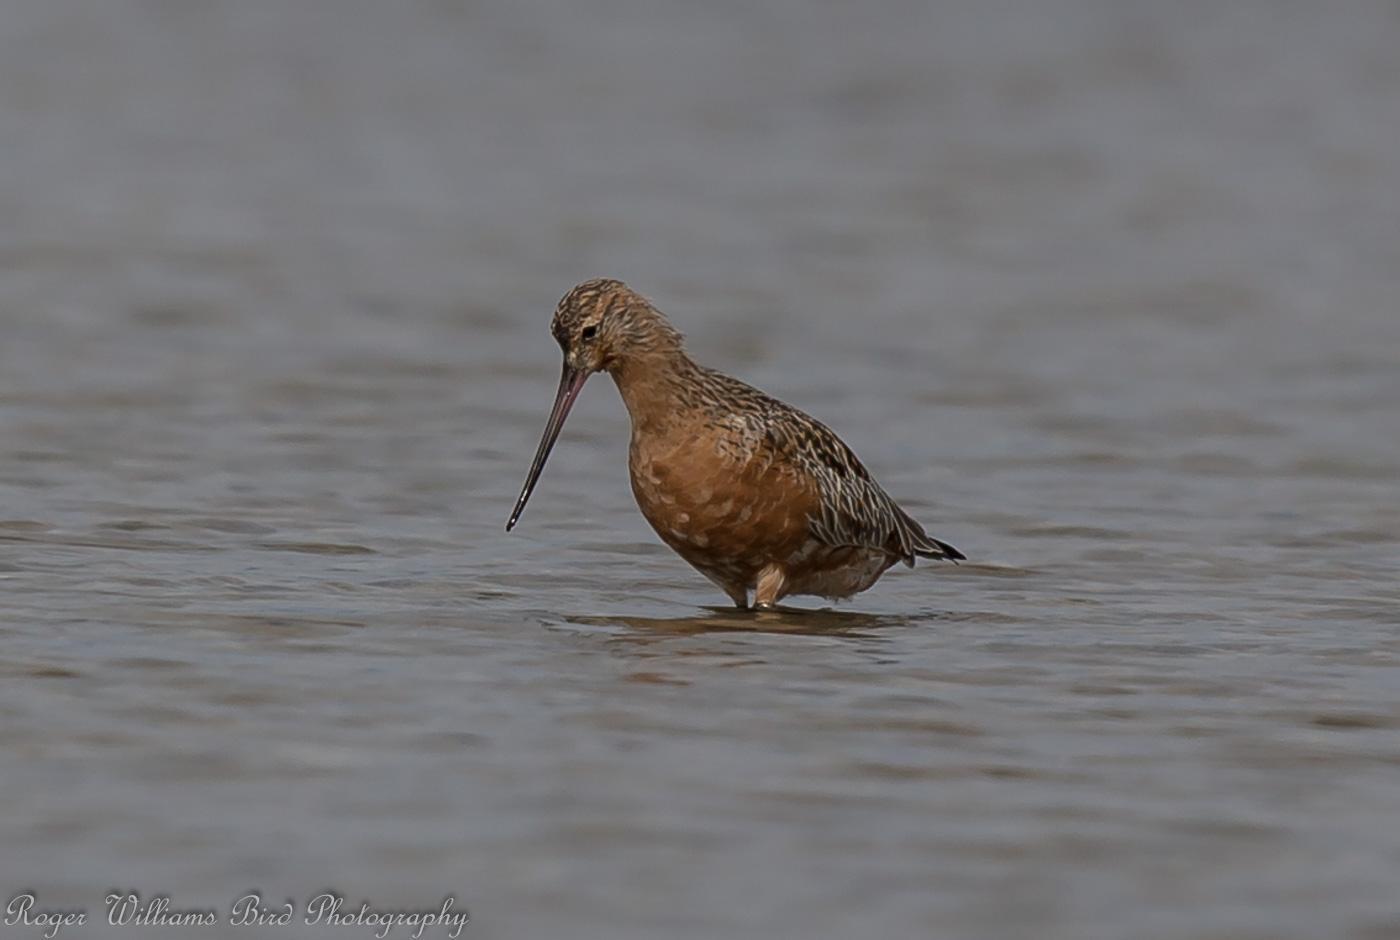 Bar-tailed Godwit Photo by Roger Williams